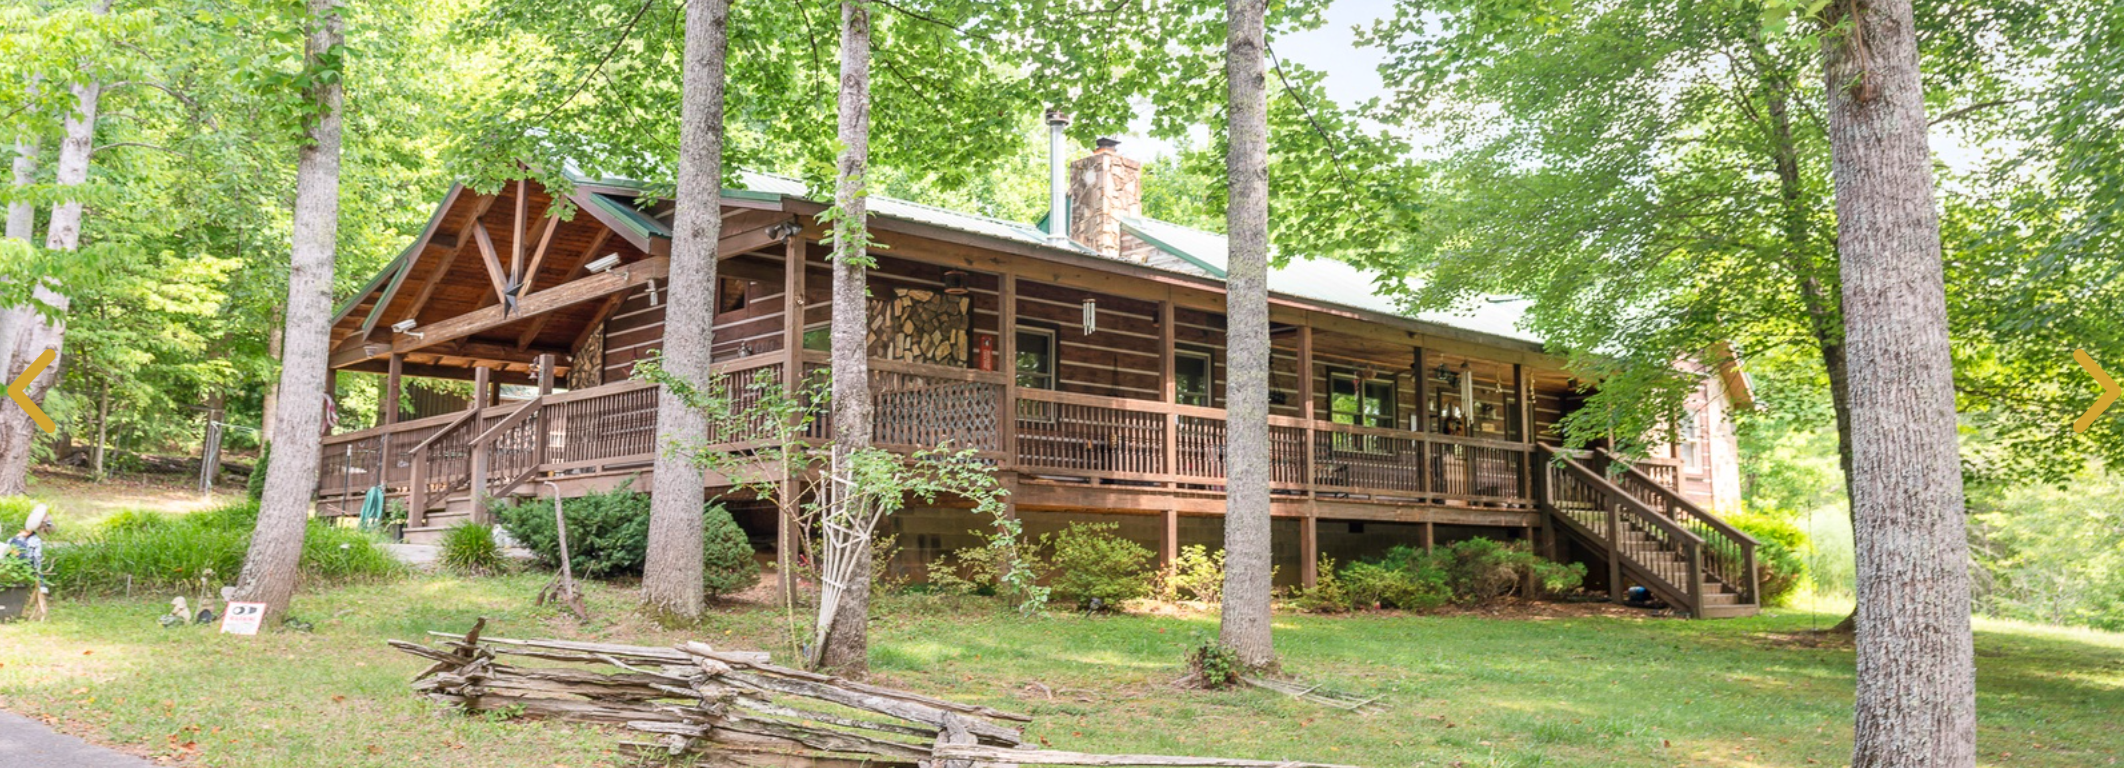 How Eden Crest Vacation Rentals partnered with Whimstay to diversify distribution and optimize occupancy rates for their vacation properties in the Great Smoky Mountains.